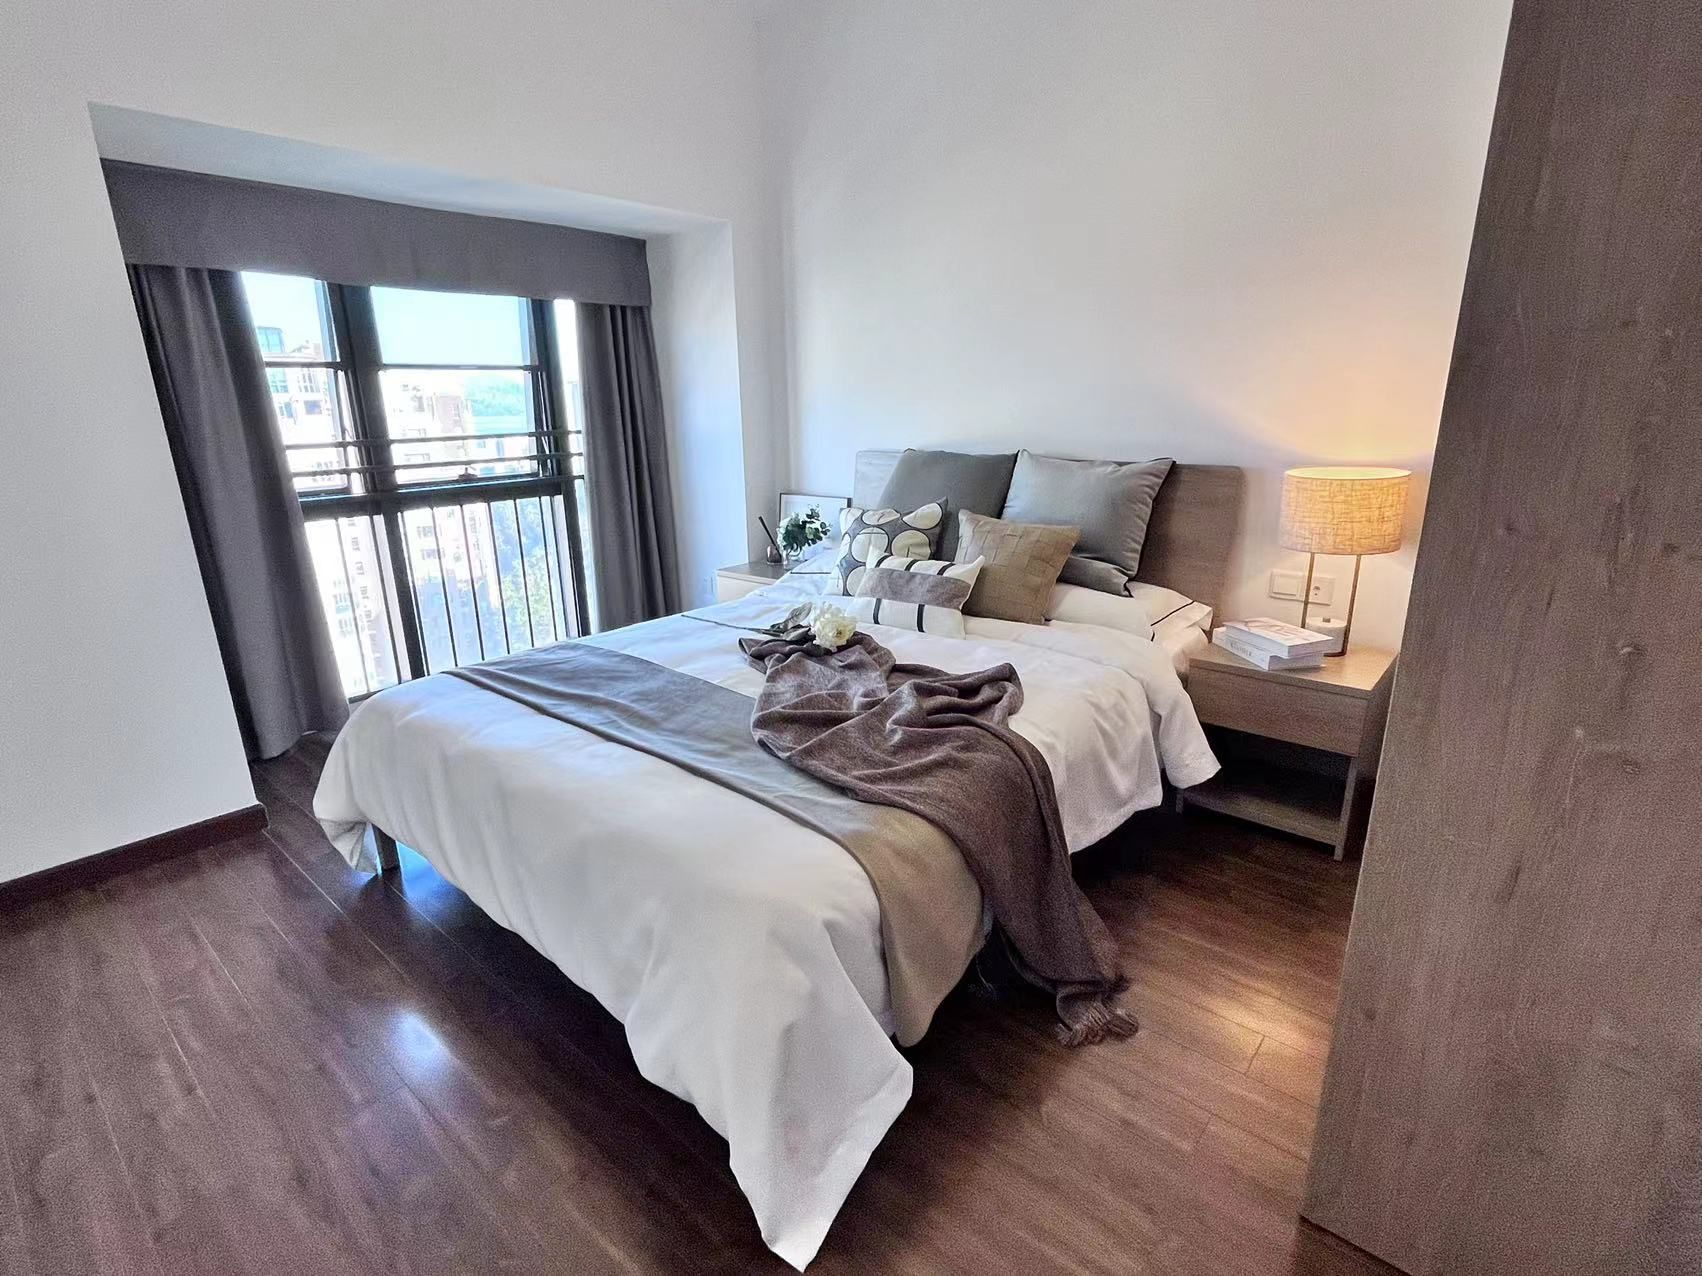 Featured image for “3bedrooms1bathroom good quality apartment in shekou”